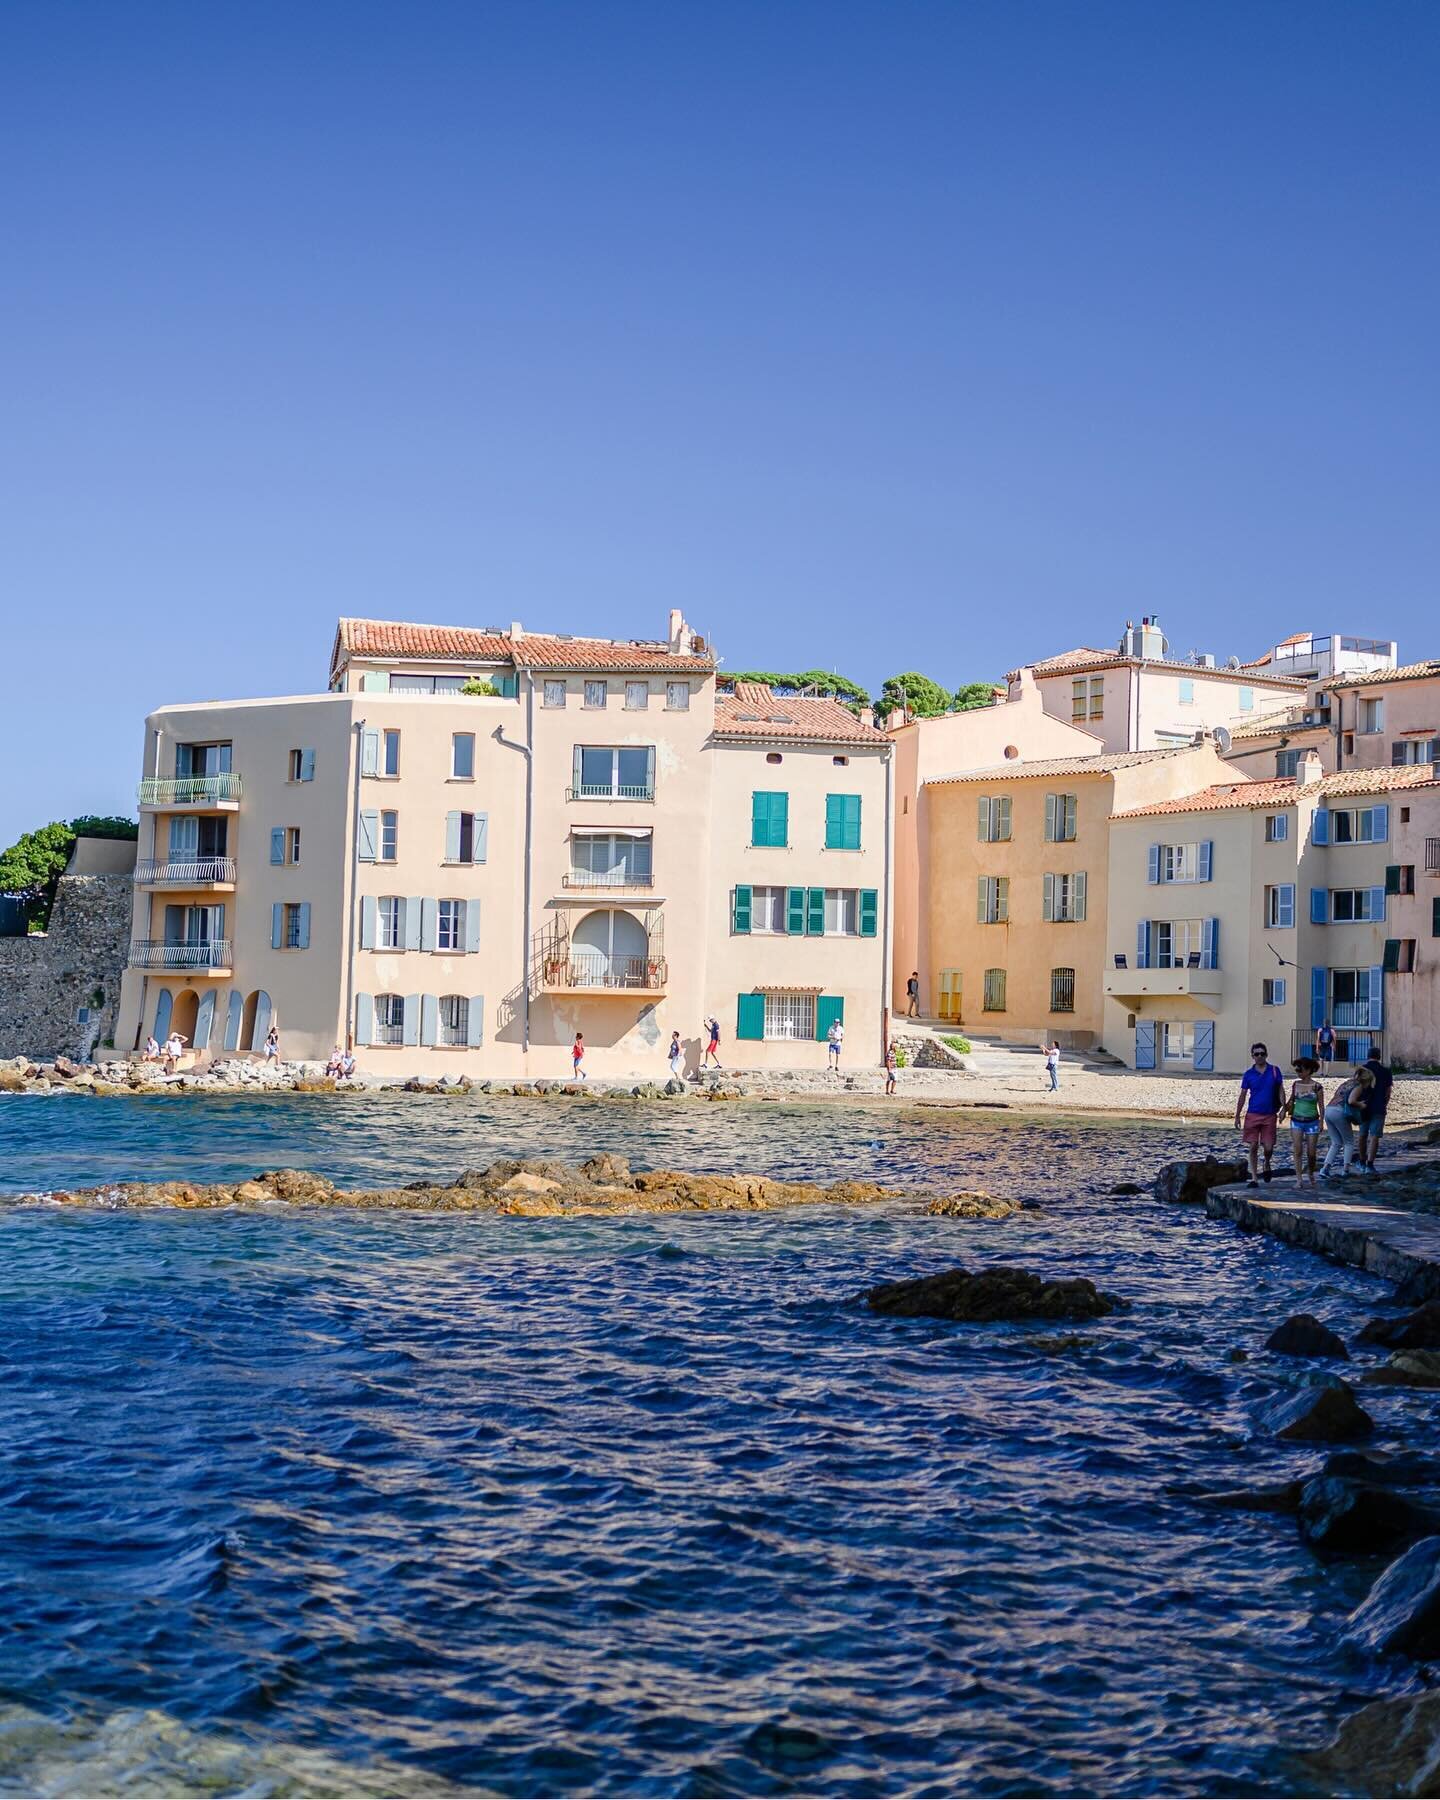 As you wander through the narrow alleyways and vibrant squares in Saint-Tropez, you can feel the heartbeat of this coastal gem, pulsing with the energy of locals and travellers alike. 

From the shimmering waters of the harbour to the vibrant blooms 